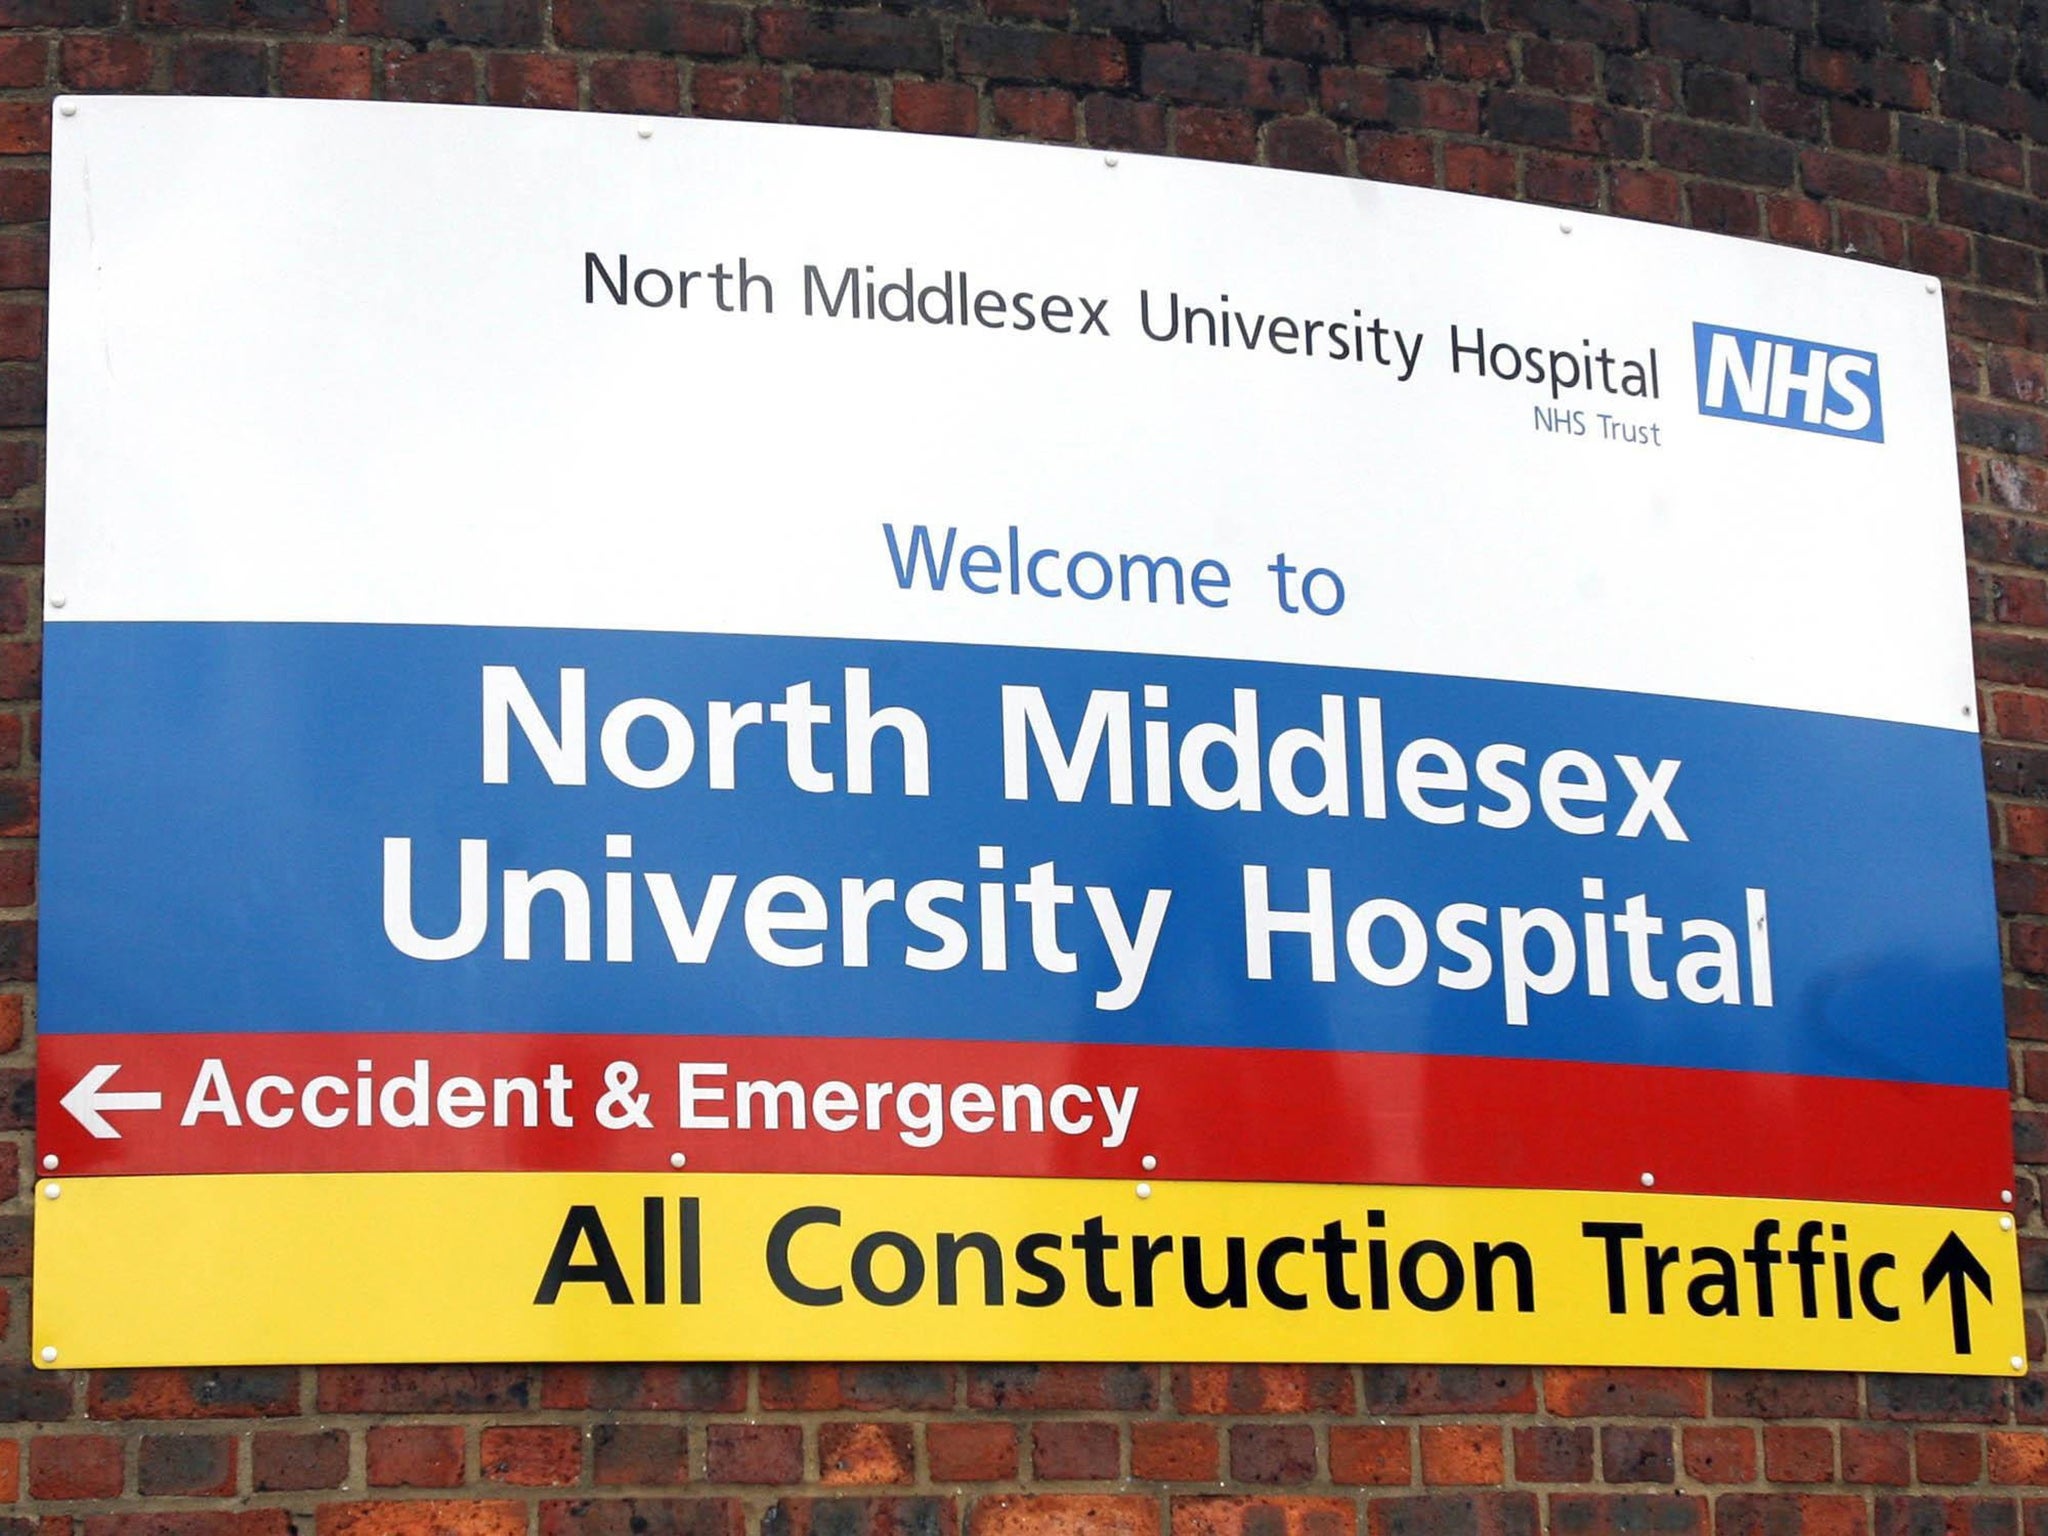 North Middlesex University Hospital was rated inadequate by the CQC